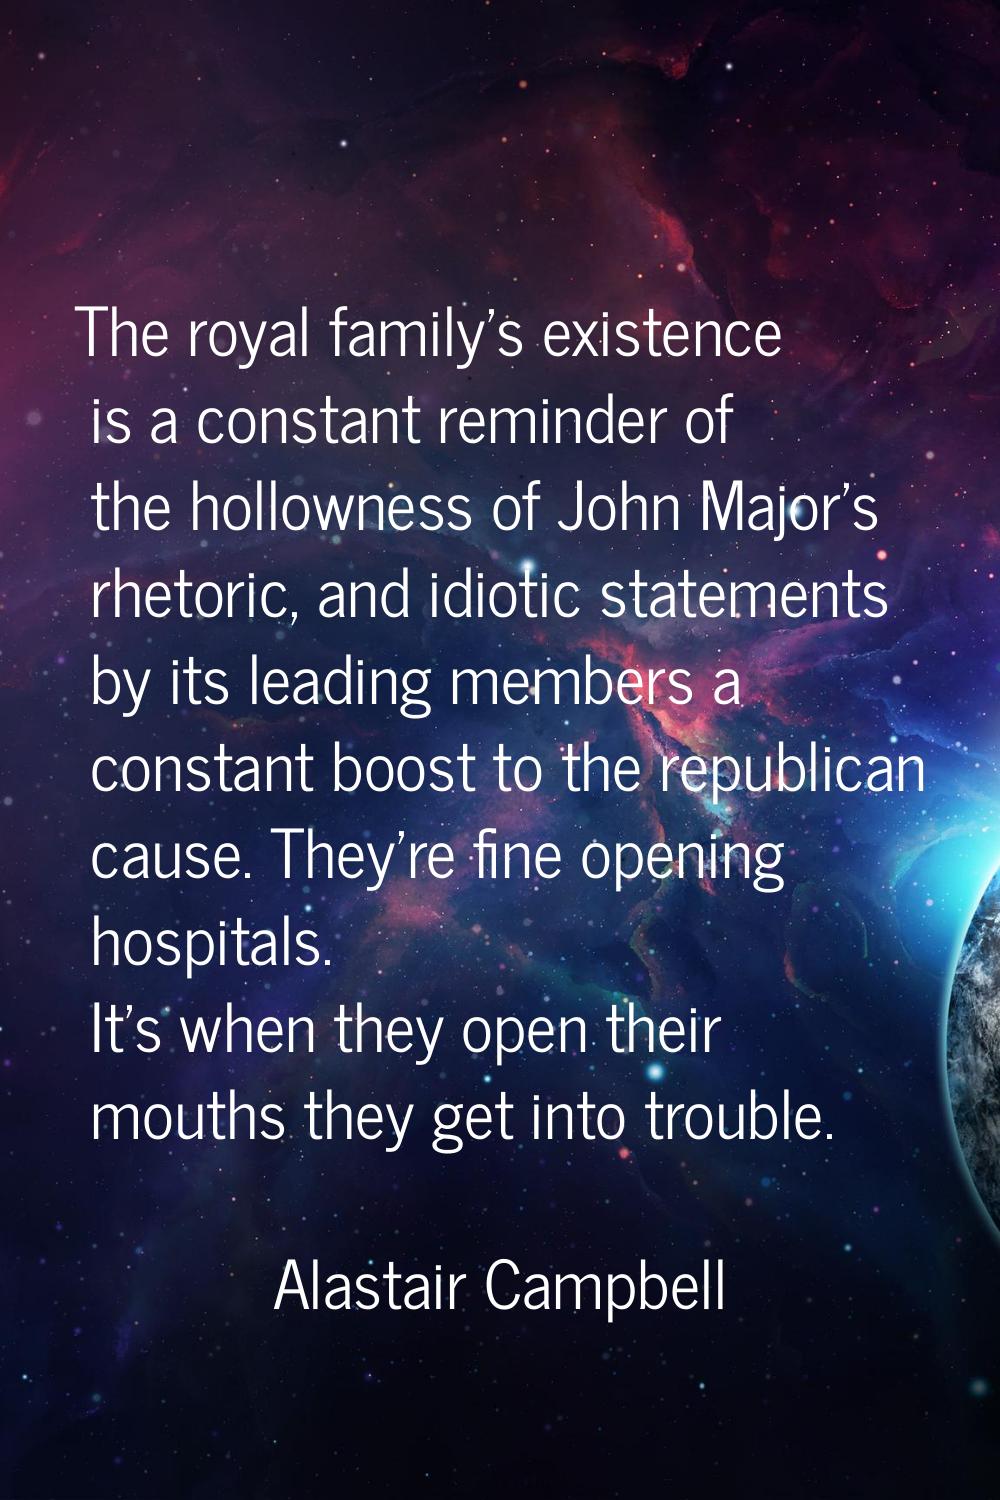 The royal family's existence is a constant reminder of the hollowness of John Major's rhetoric, and